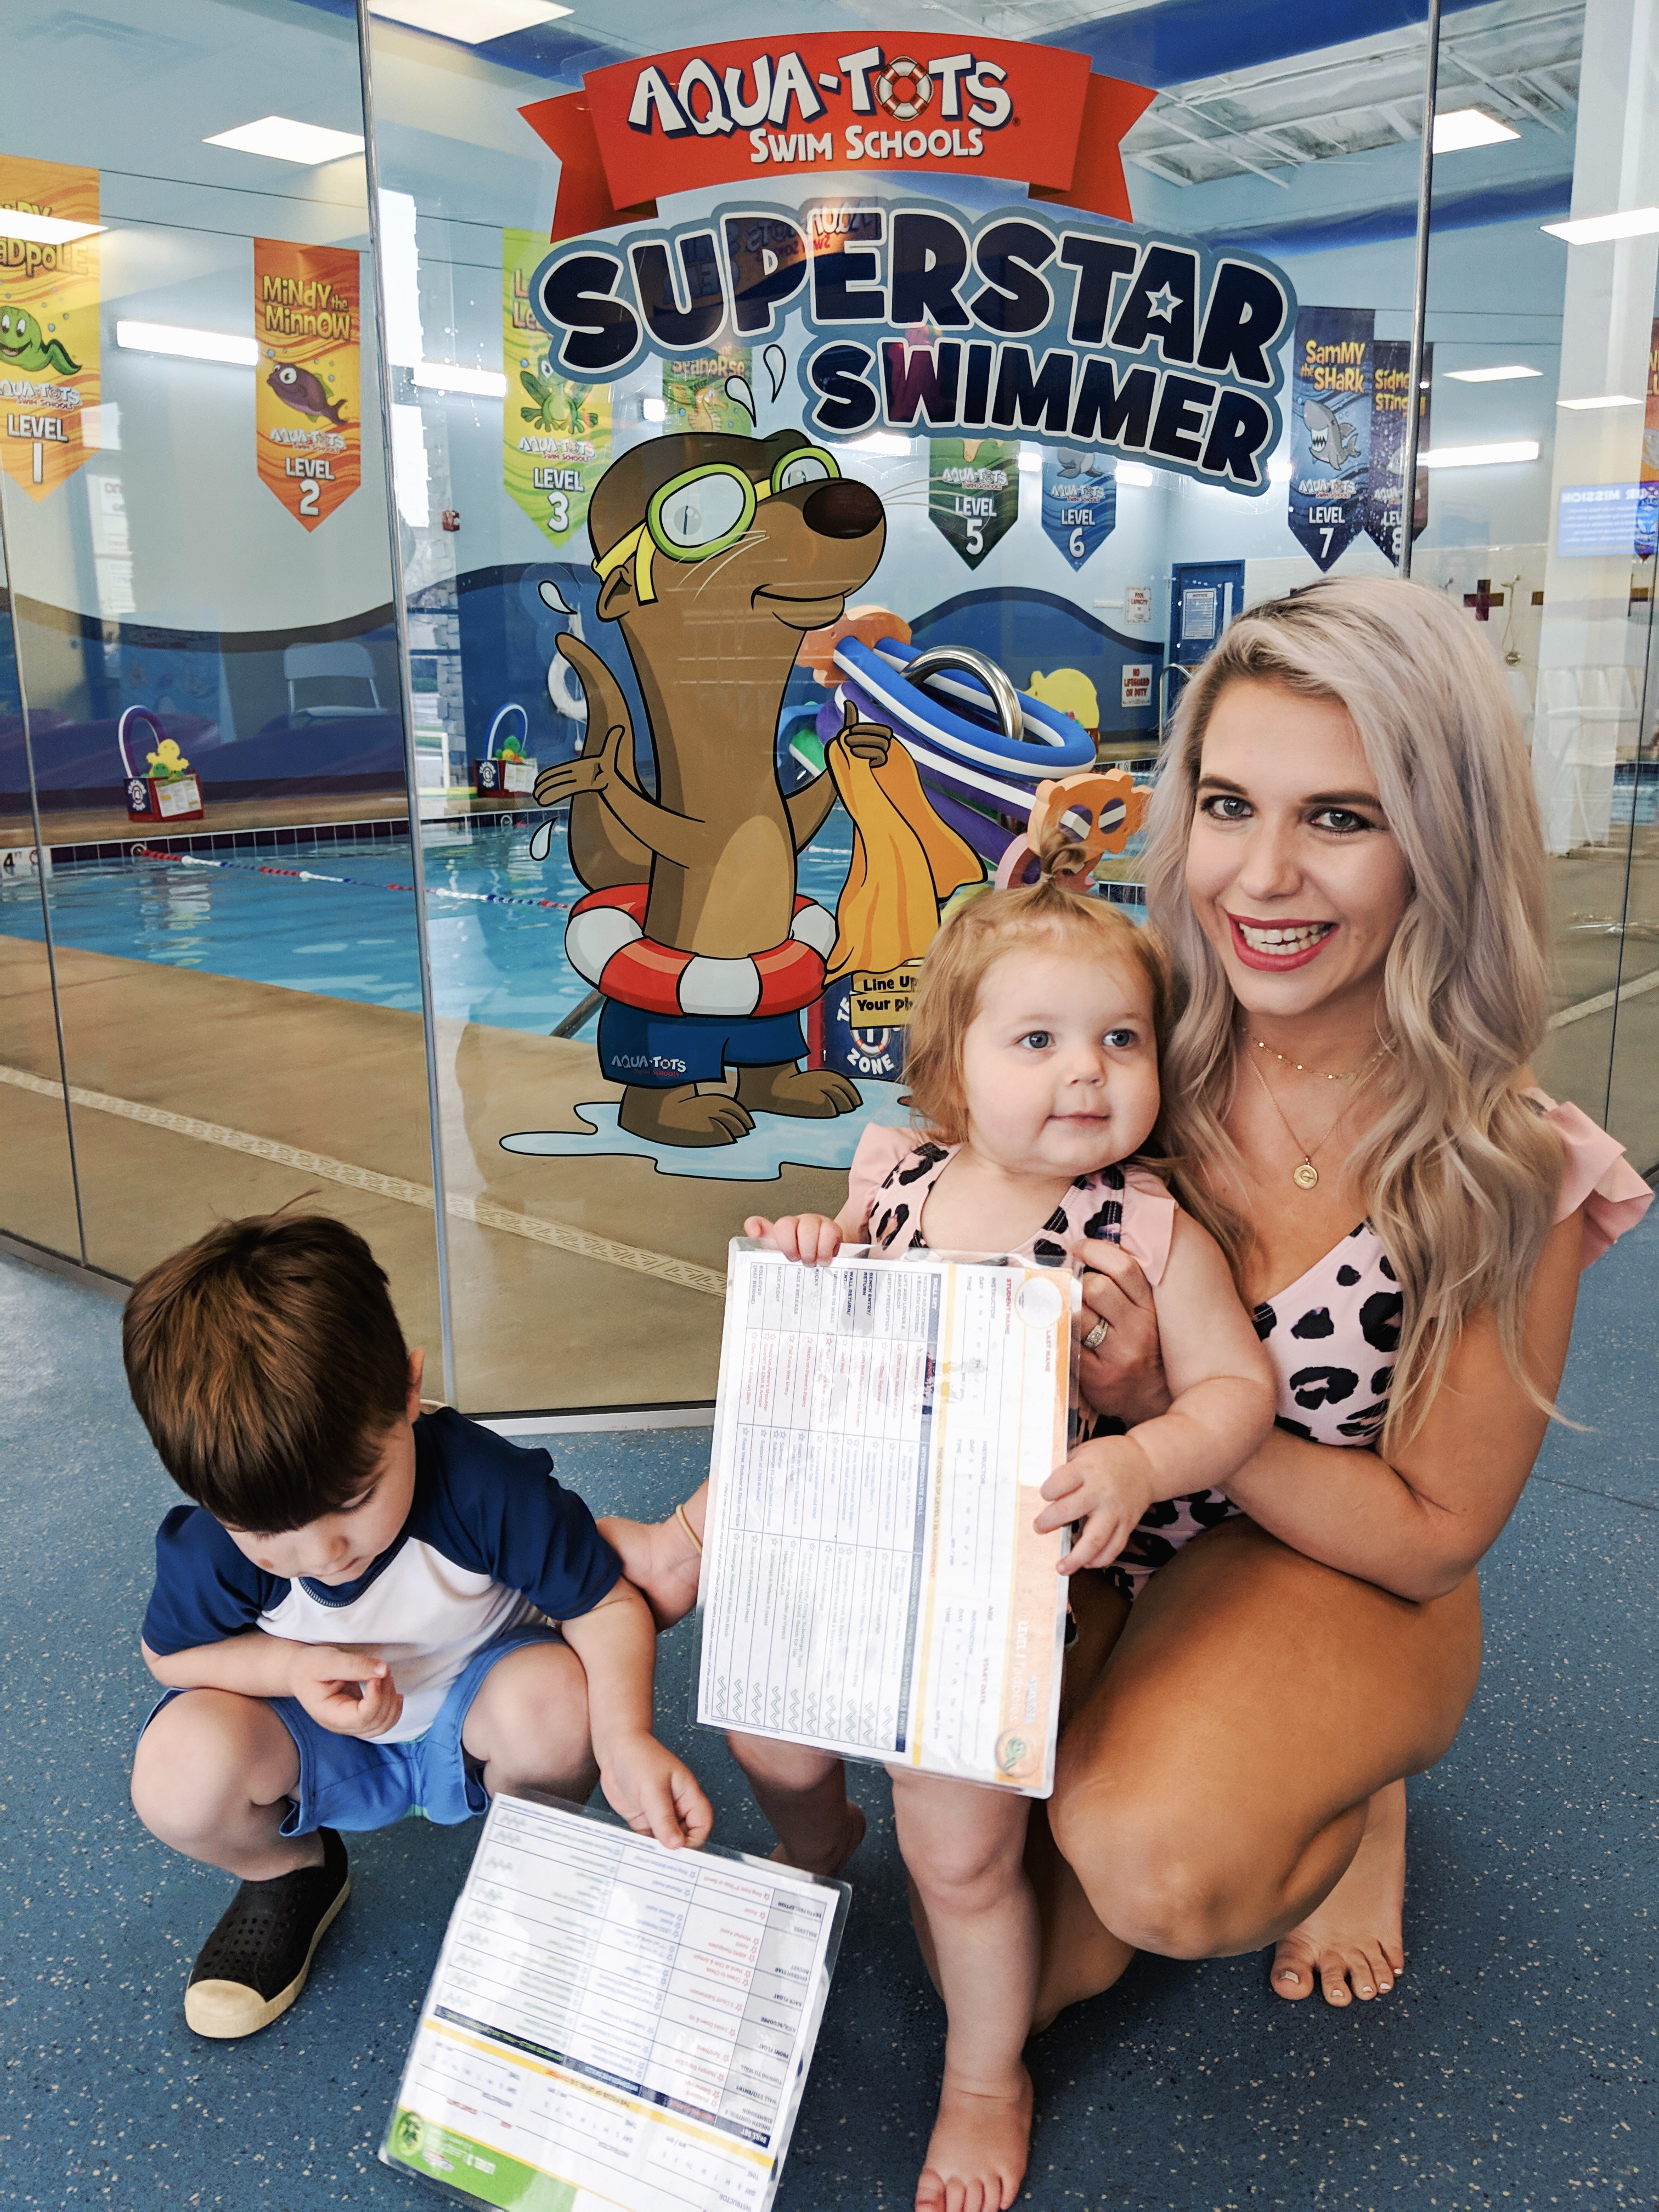 Water Safety Tips for Toddlers: May is National Drowning Prevention Month, so it's time to review water safety tips! Blogger shares water safety tips for toddlers learned from swim lessons at Aqua-Tots Swim Schools in Olathe, Kansas. #swimming #swimlessons #watersafety #toddlers 